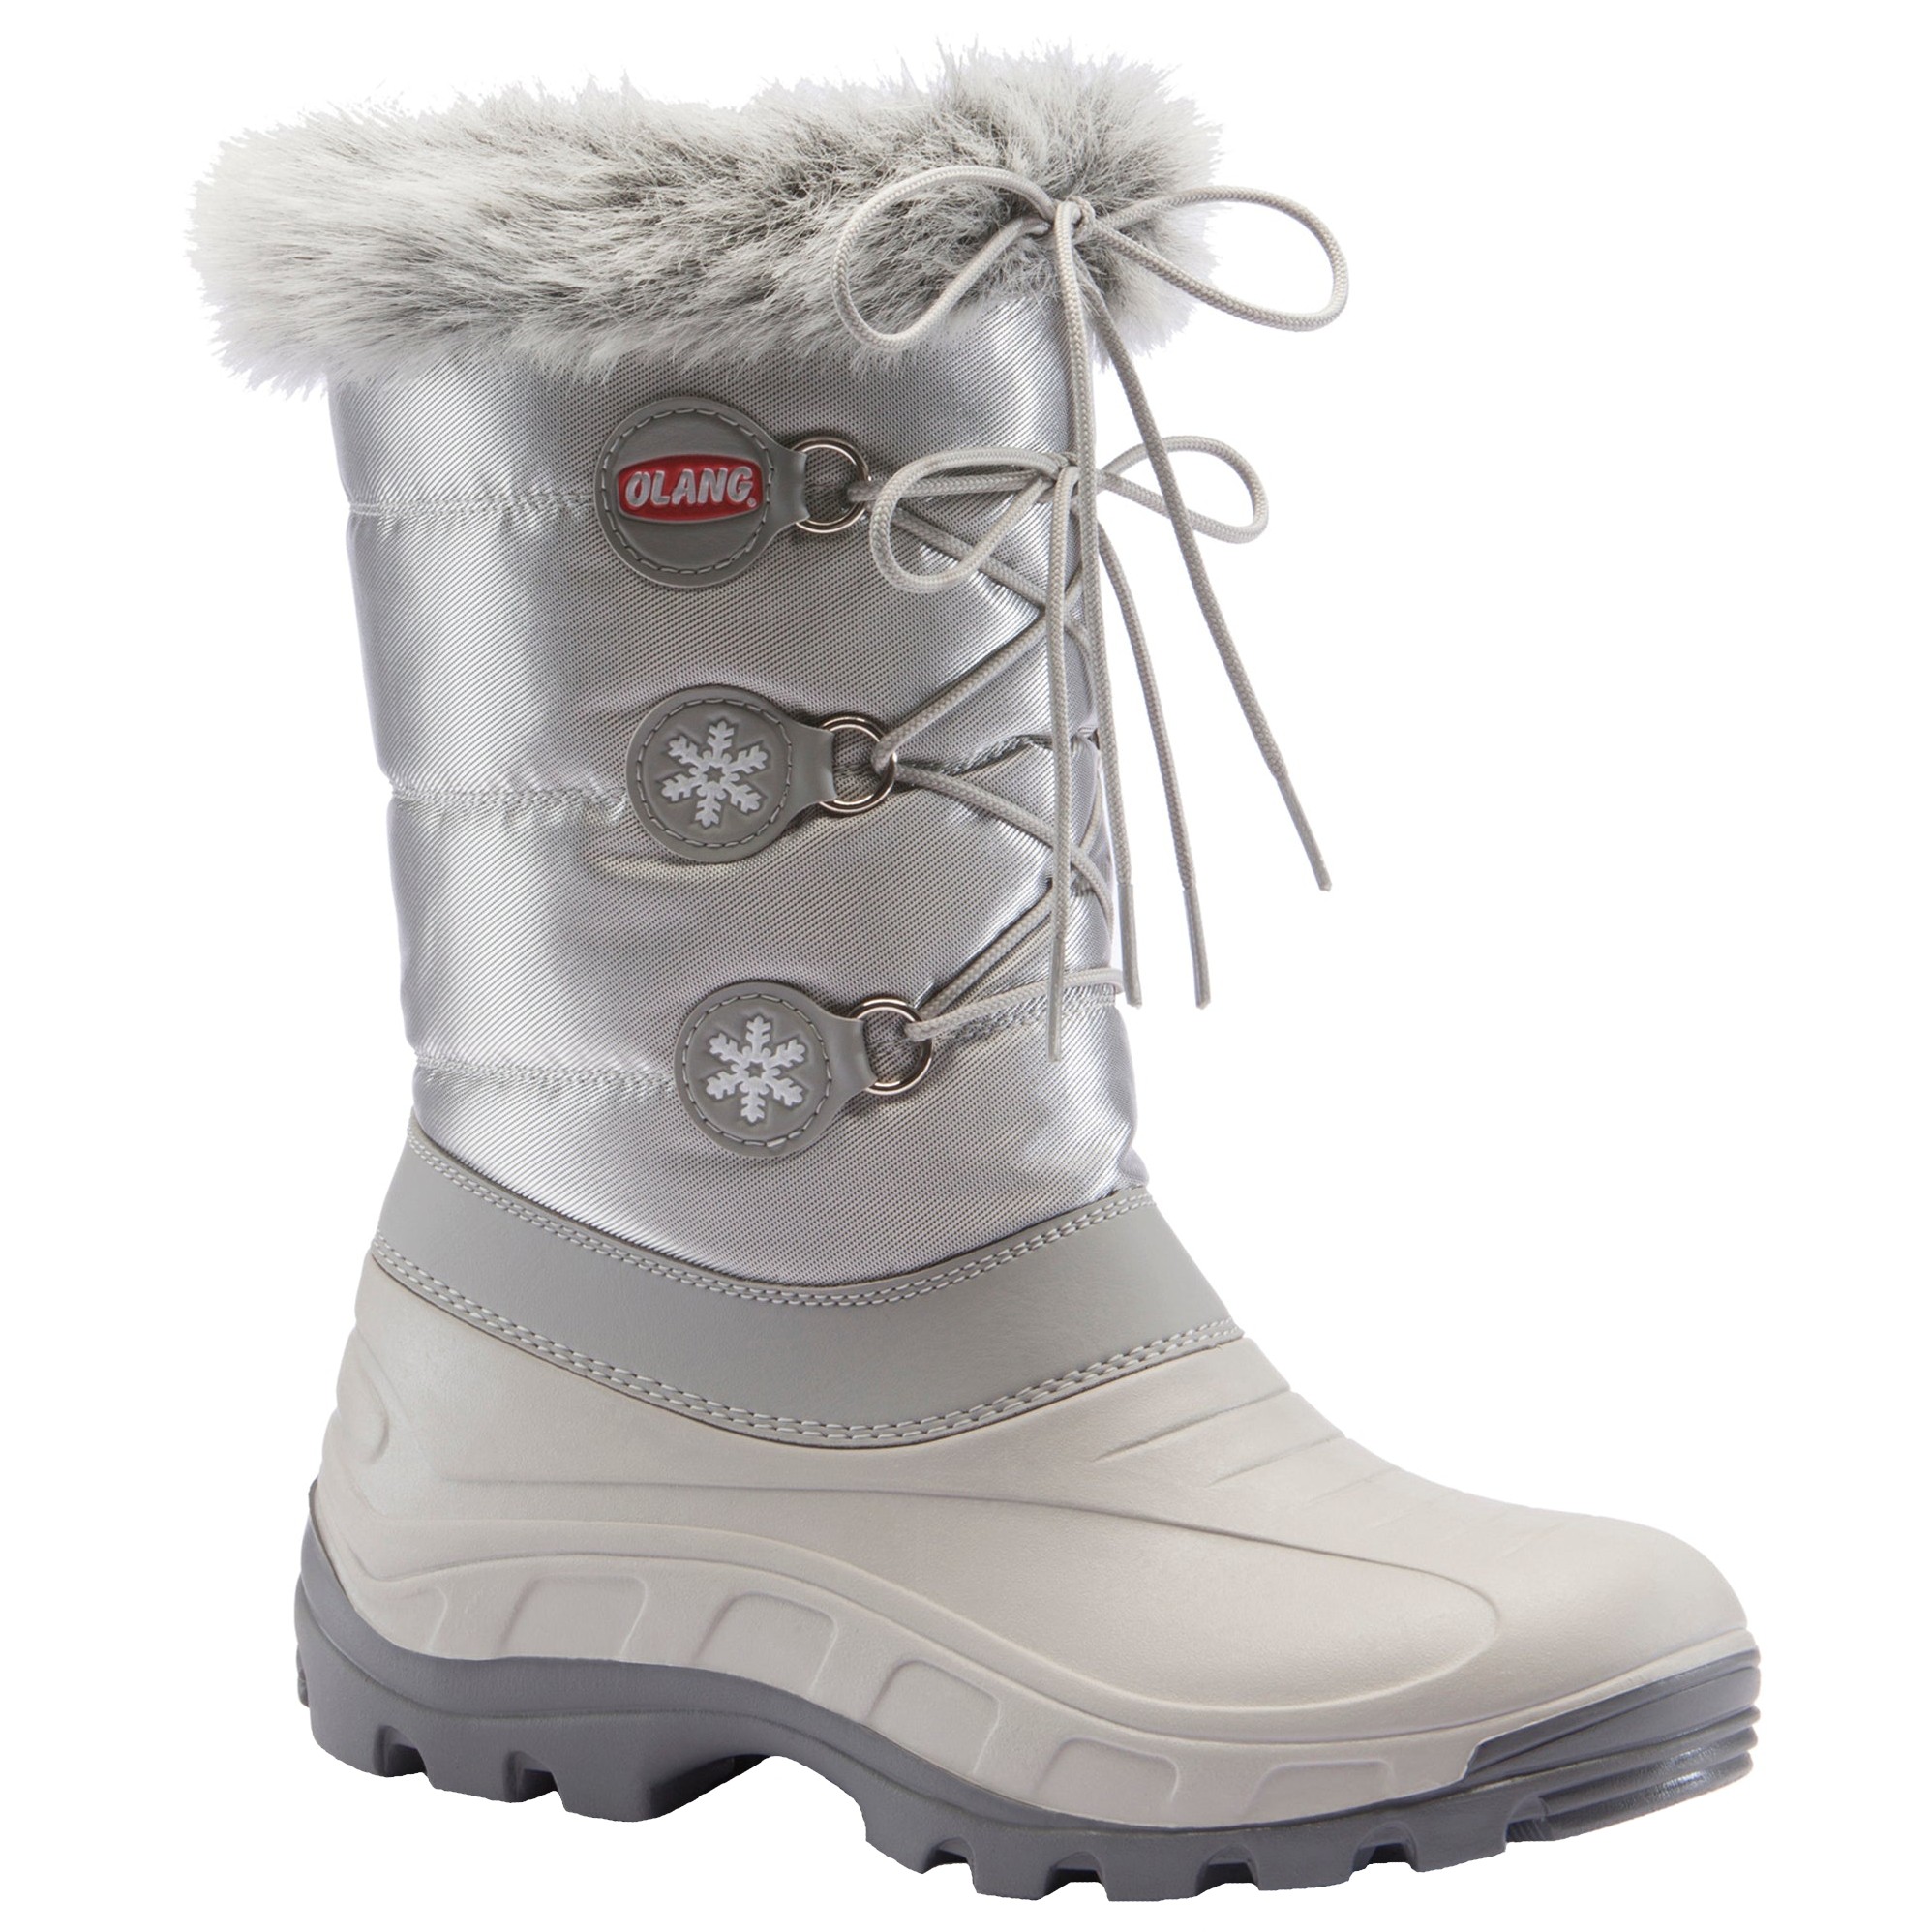 Olang Patty Winter Snow Boots